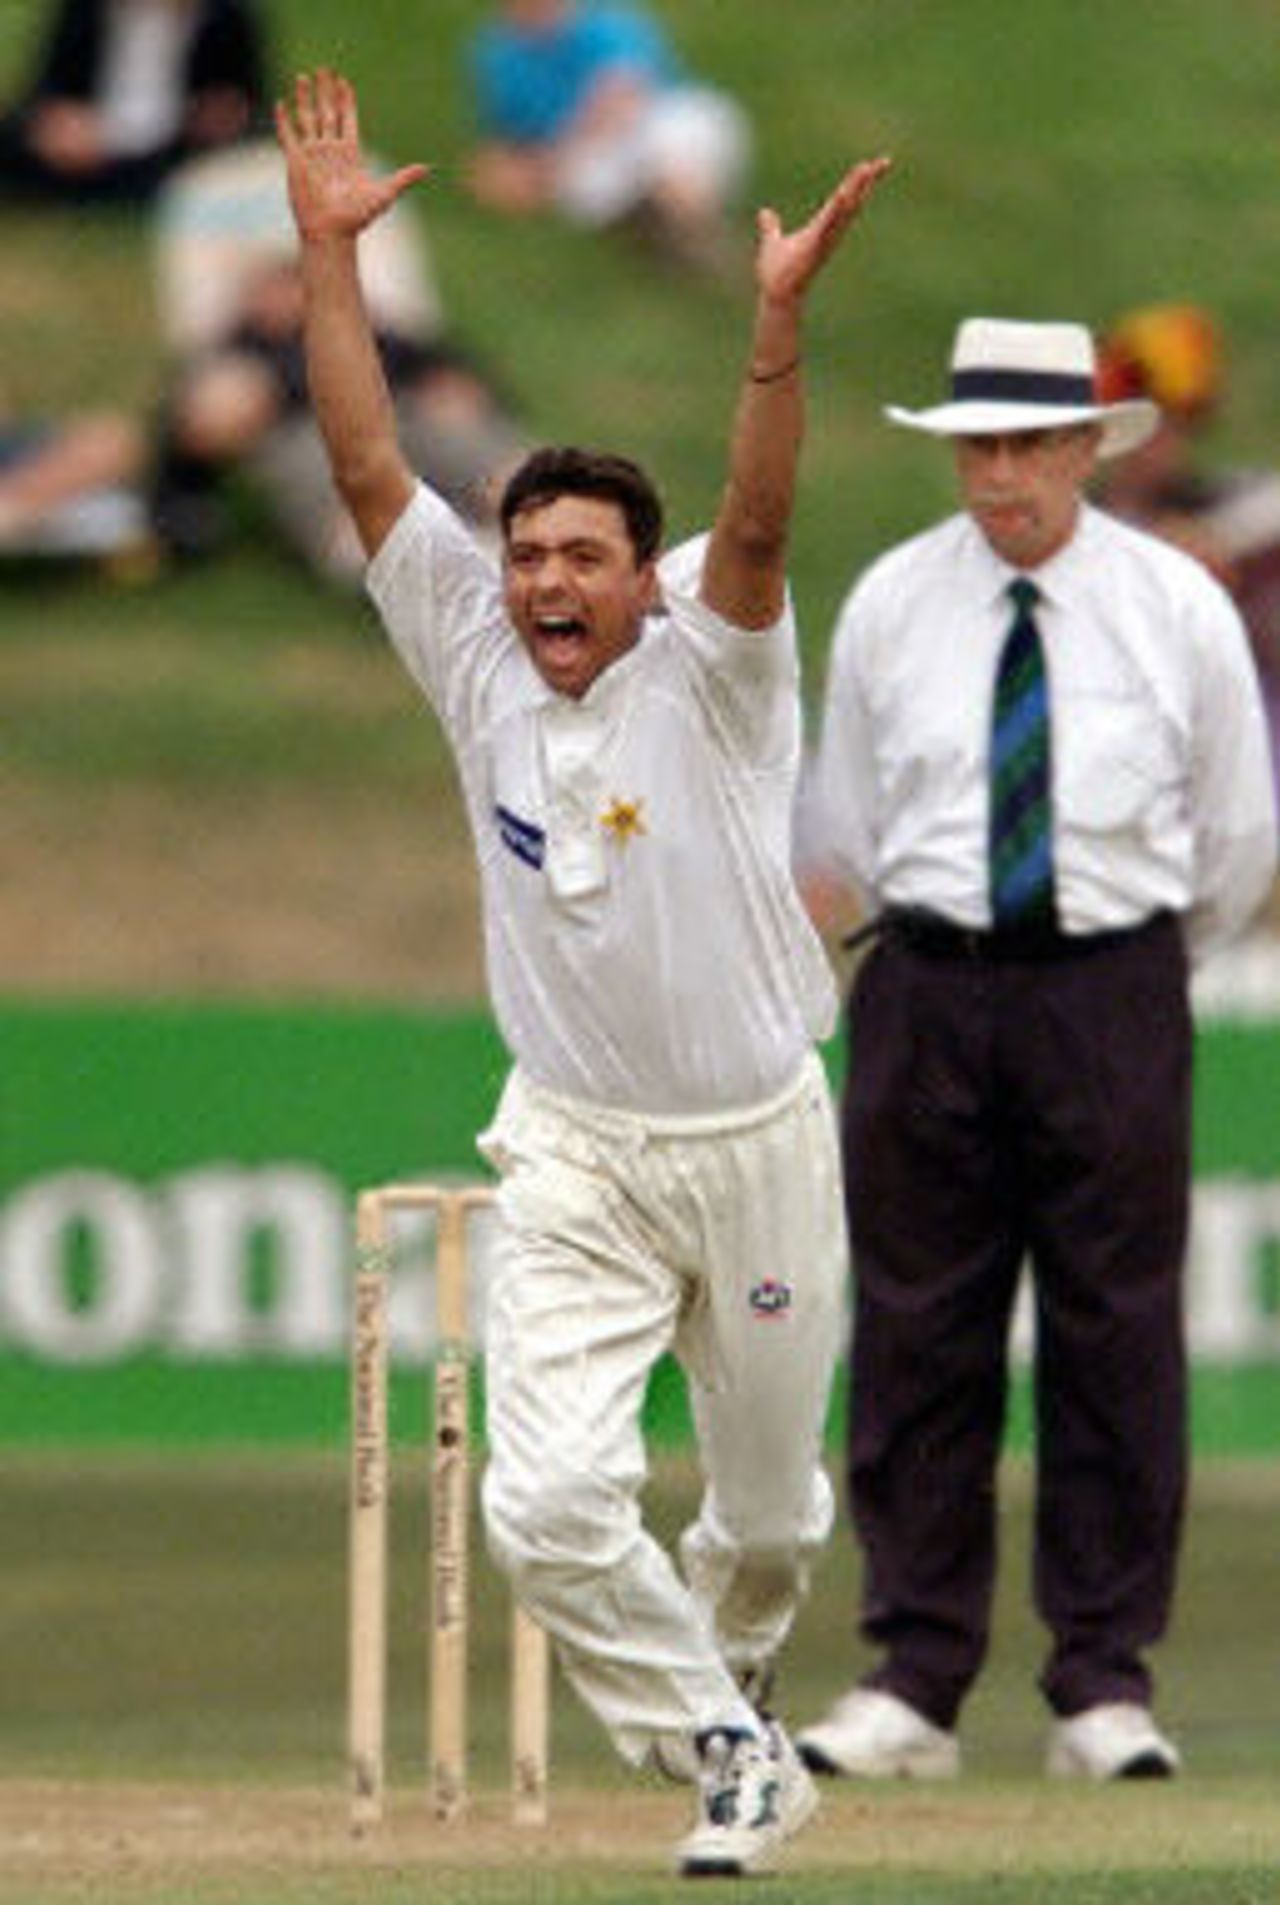 Saqlain Mushtaq appeals loudly but unsuccessfully, as umpire Steve Dunne gave the New Zealand batsman not out, day 1, 3rd Test at Hamilton, 27-31 March 2001.